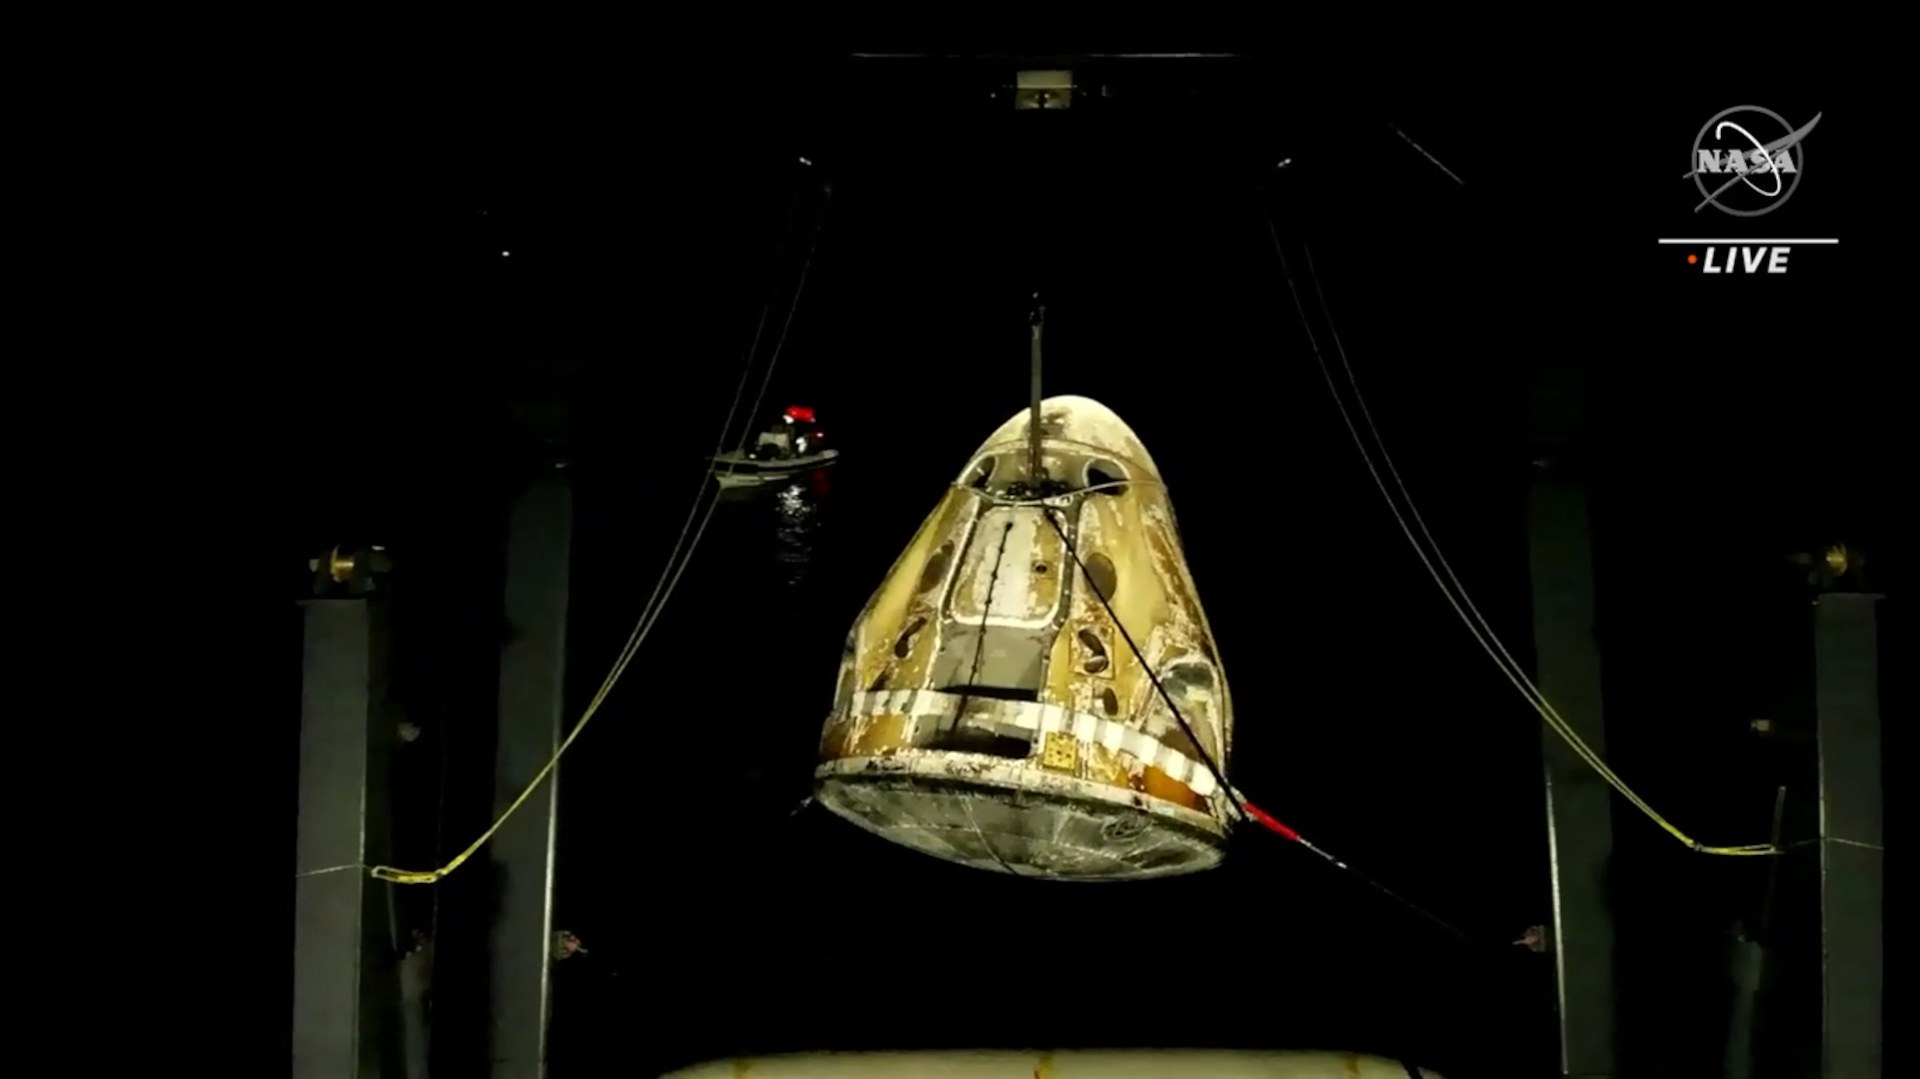 Recovery of the Crew Dragon spacecraft Endurance